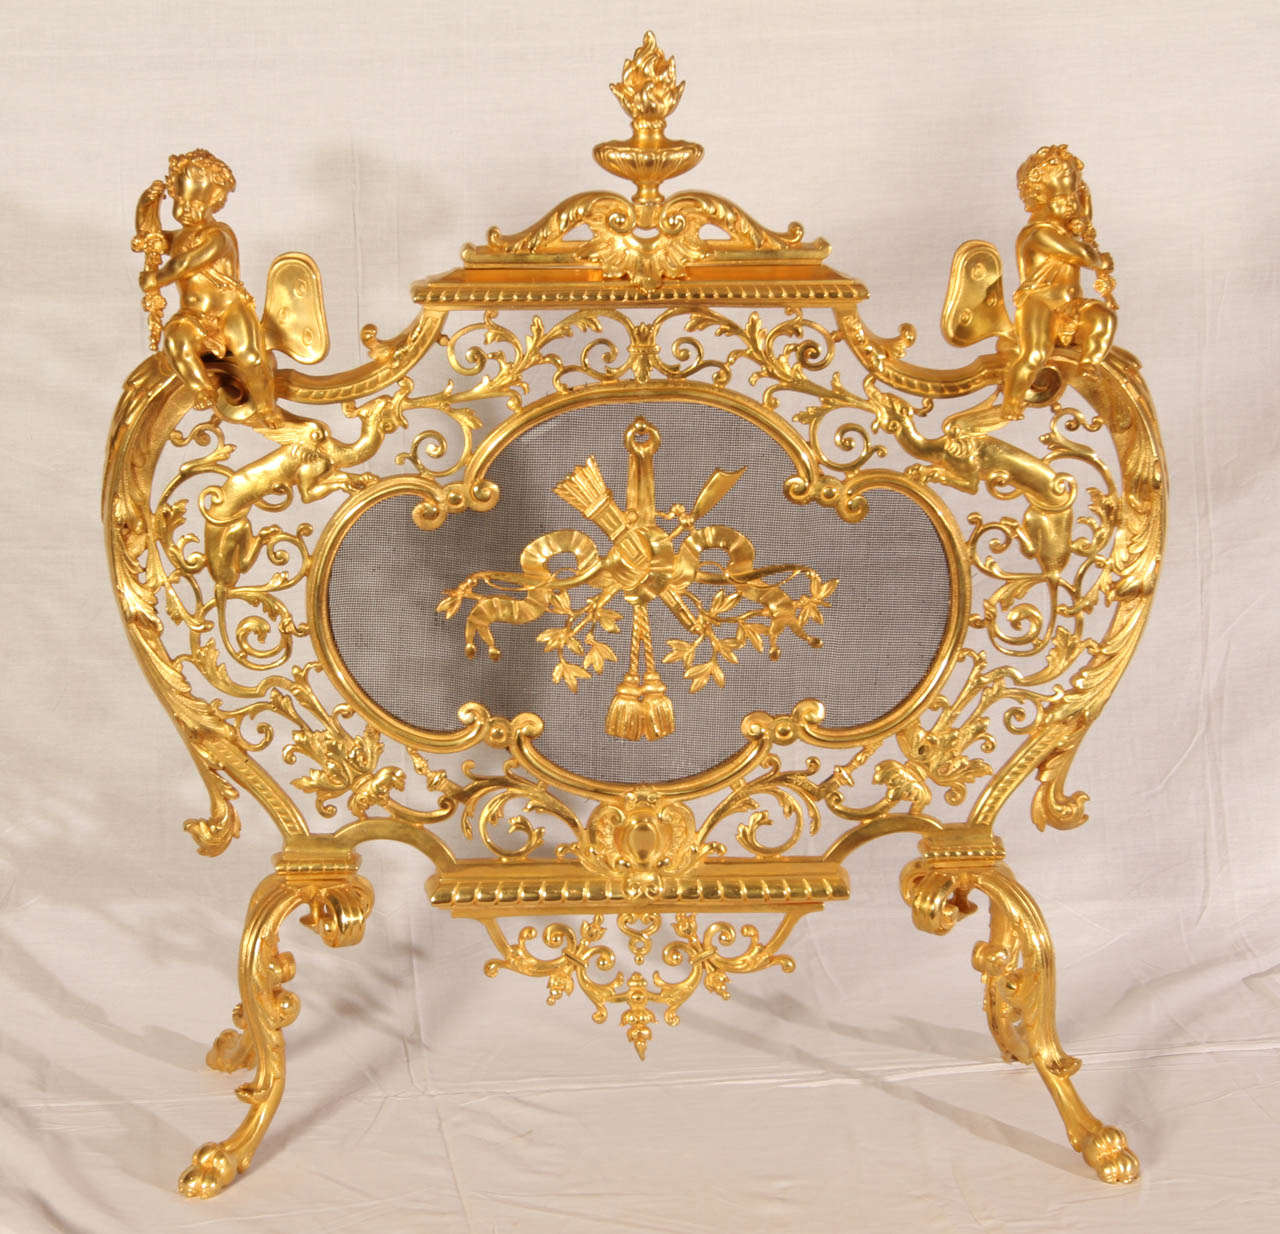 19th Century fire screen. Gilded brass and cherub decor. Very good condition. Normal wear consistent with age and use.